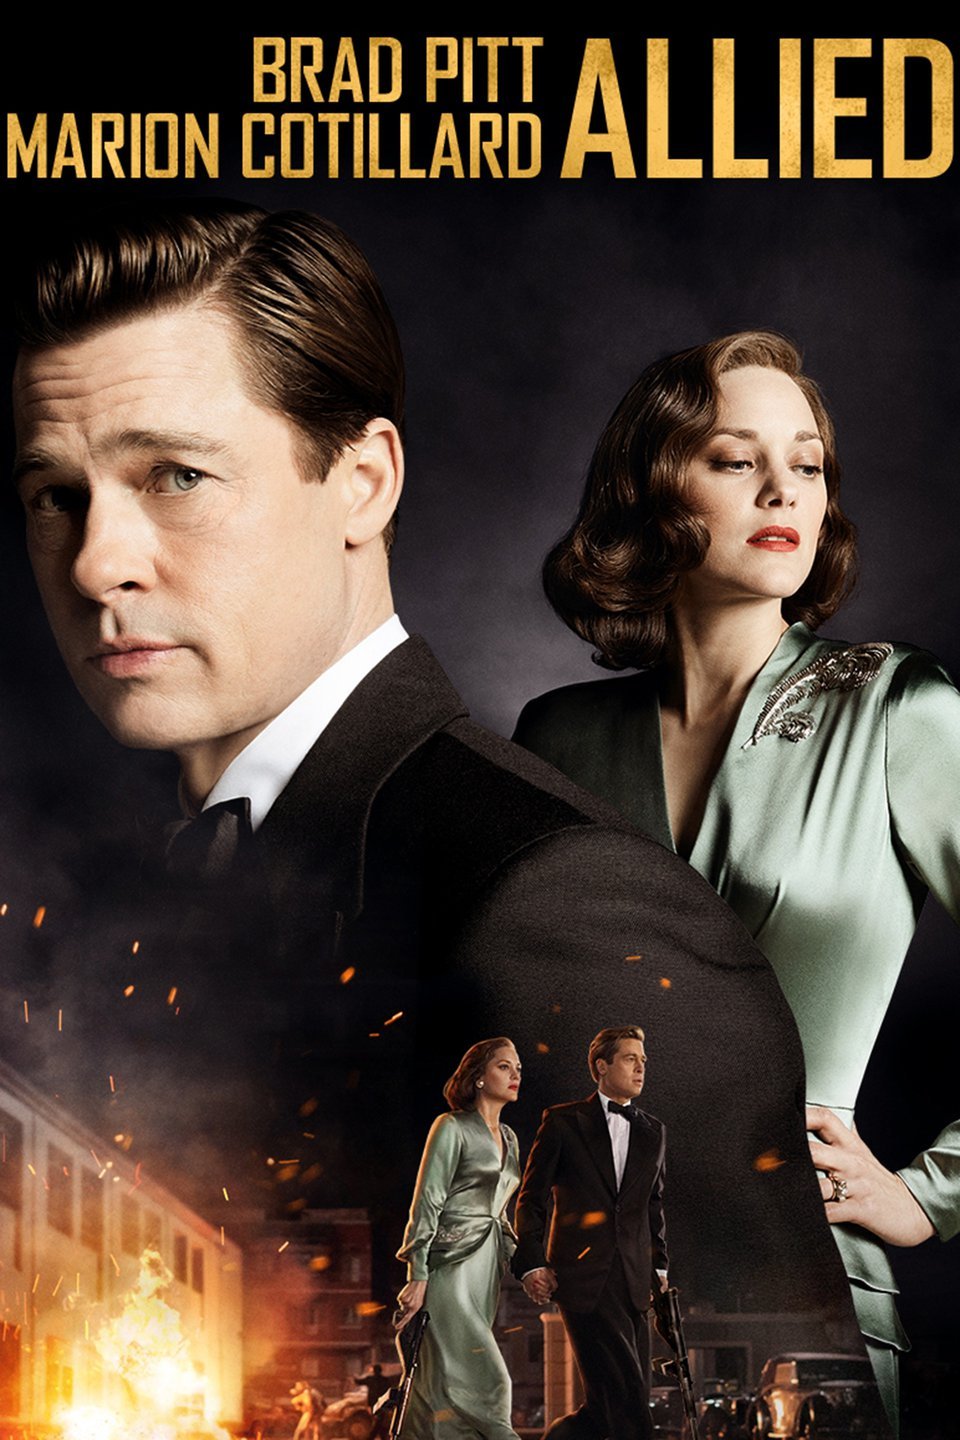 Allied: Trailer 1 - Trailers & Videos - Rotten Tomatoes